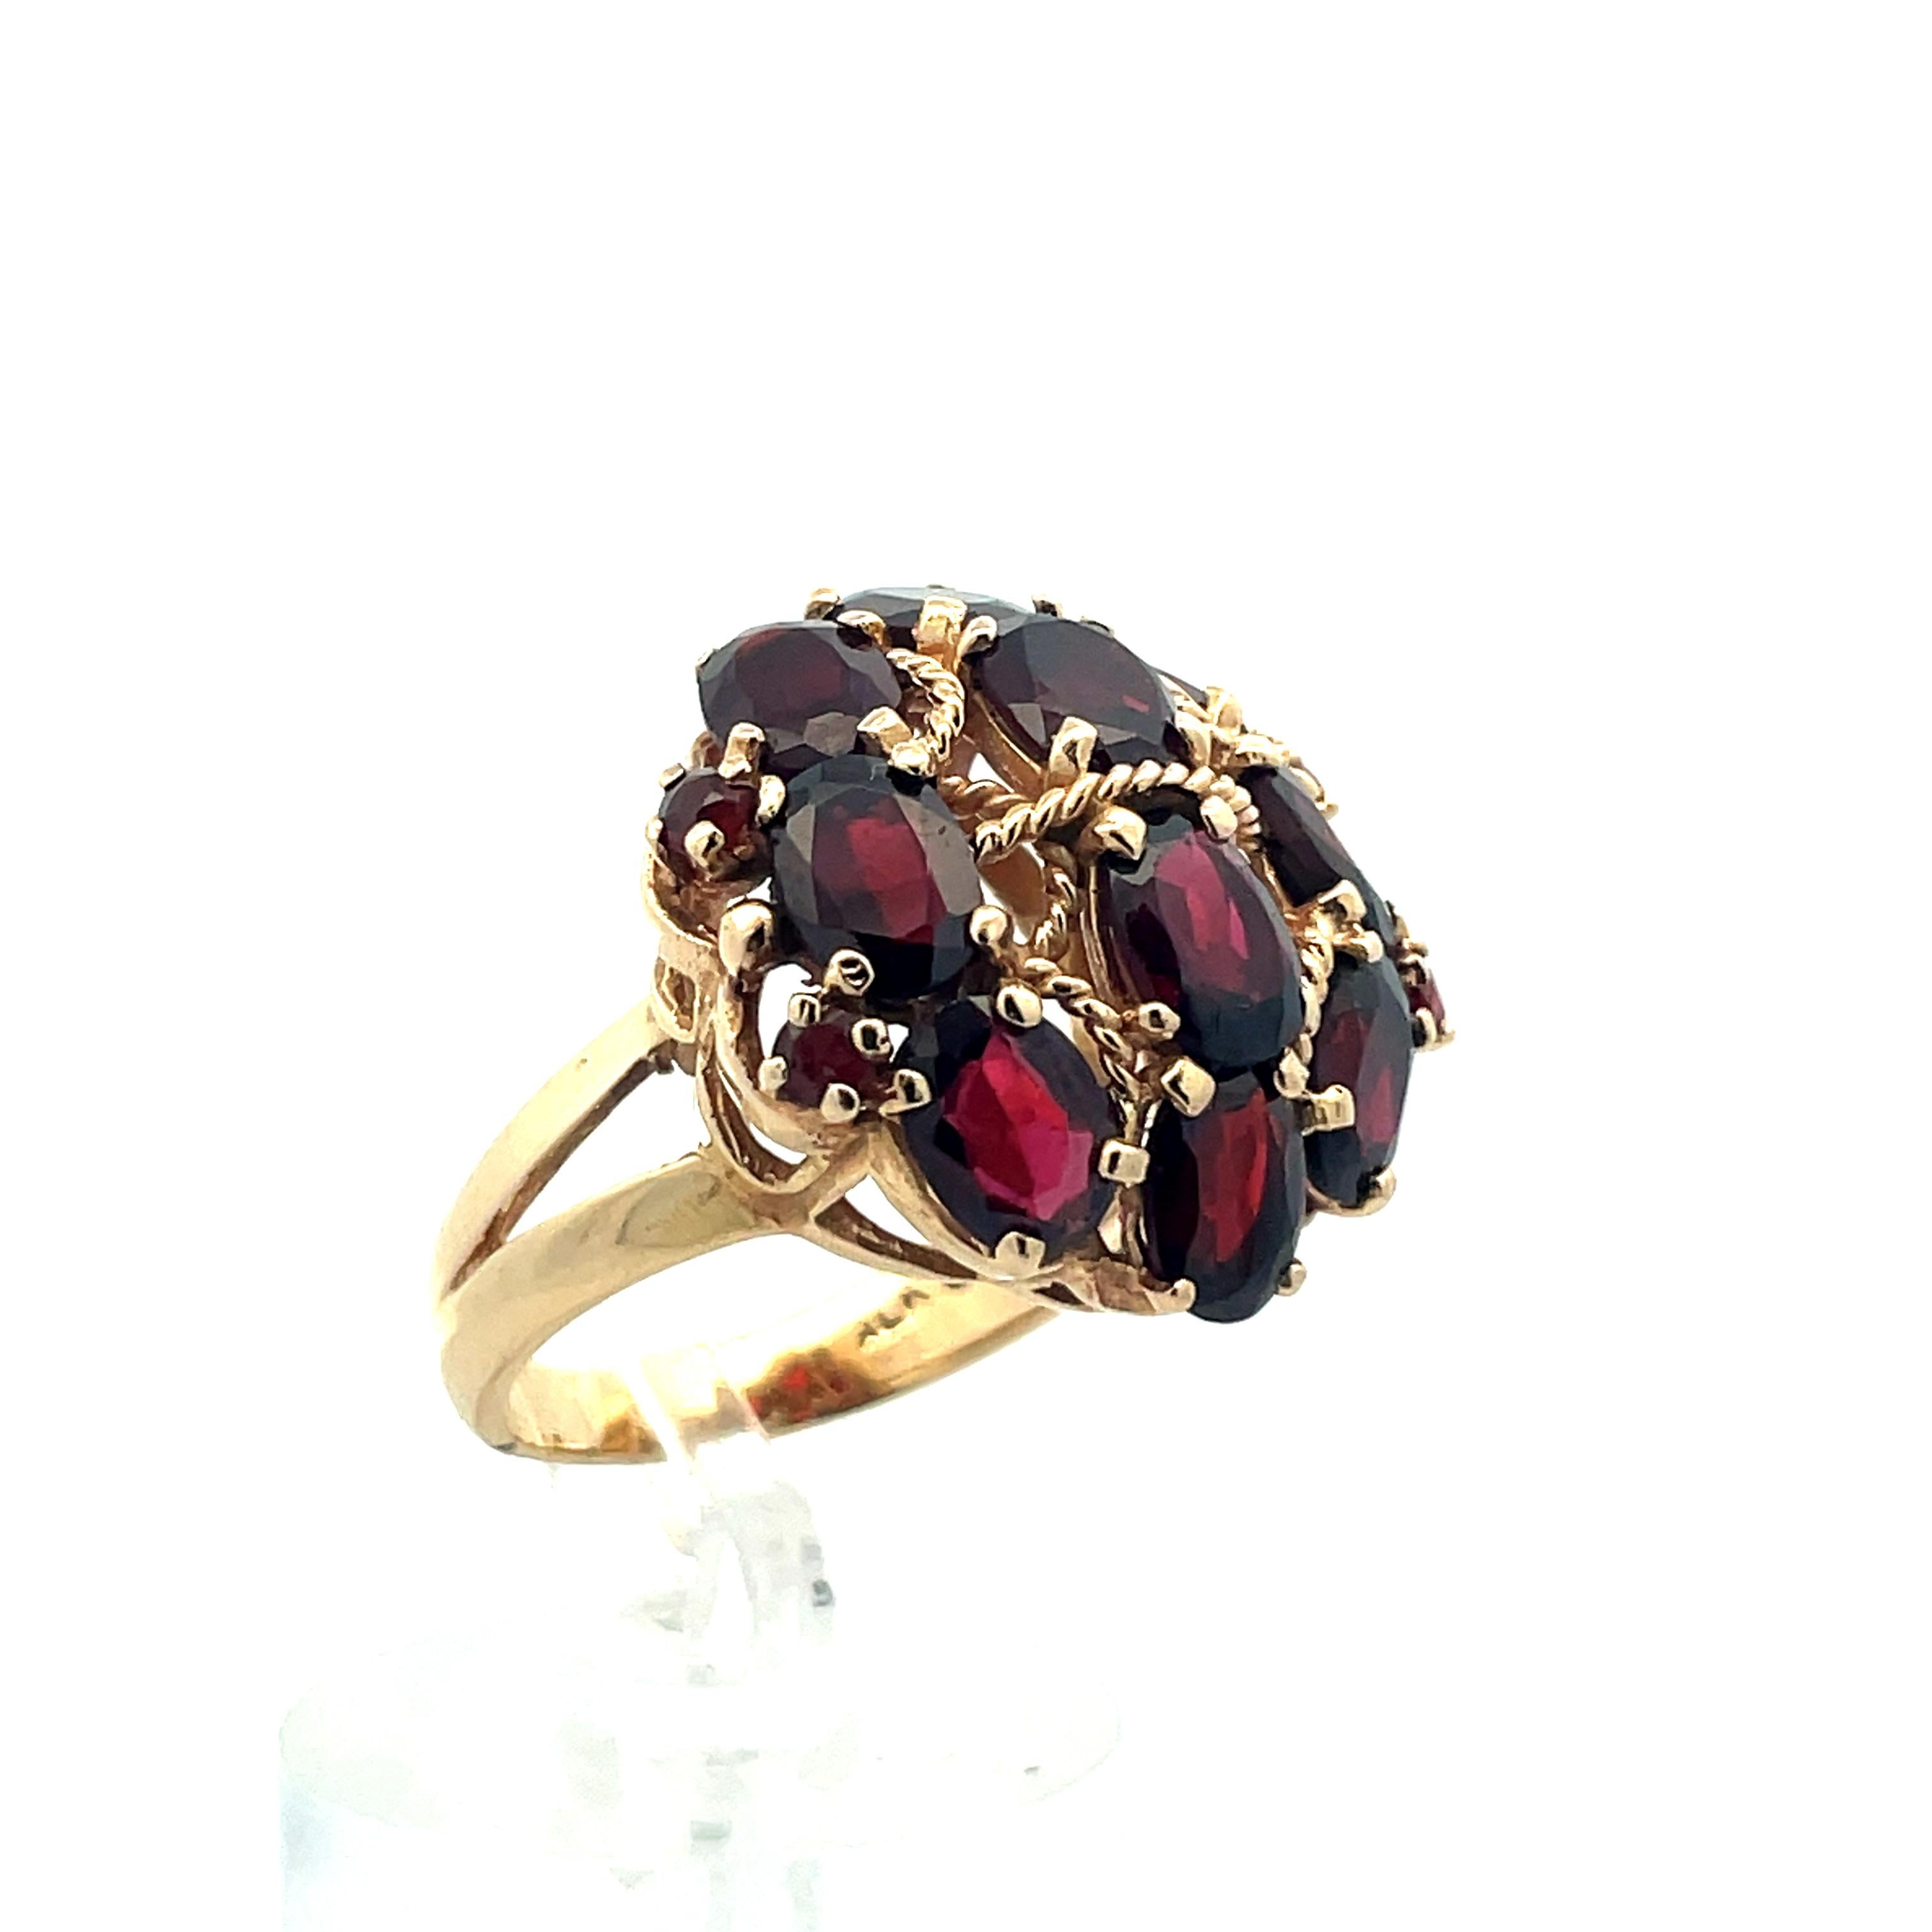 1960s 14k Yellow Gold Garnet Cluster Ring  In Excellent Condition For Sale In Lexington, KY